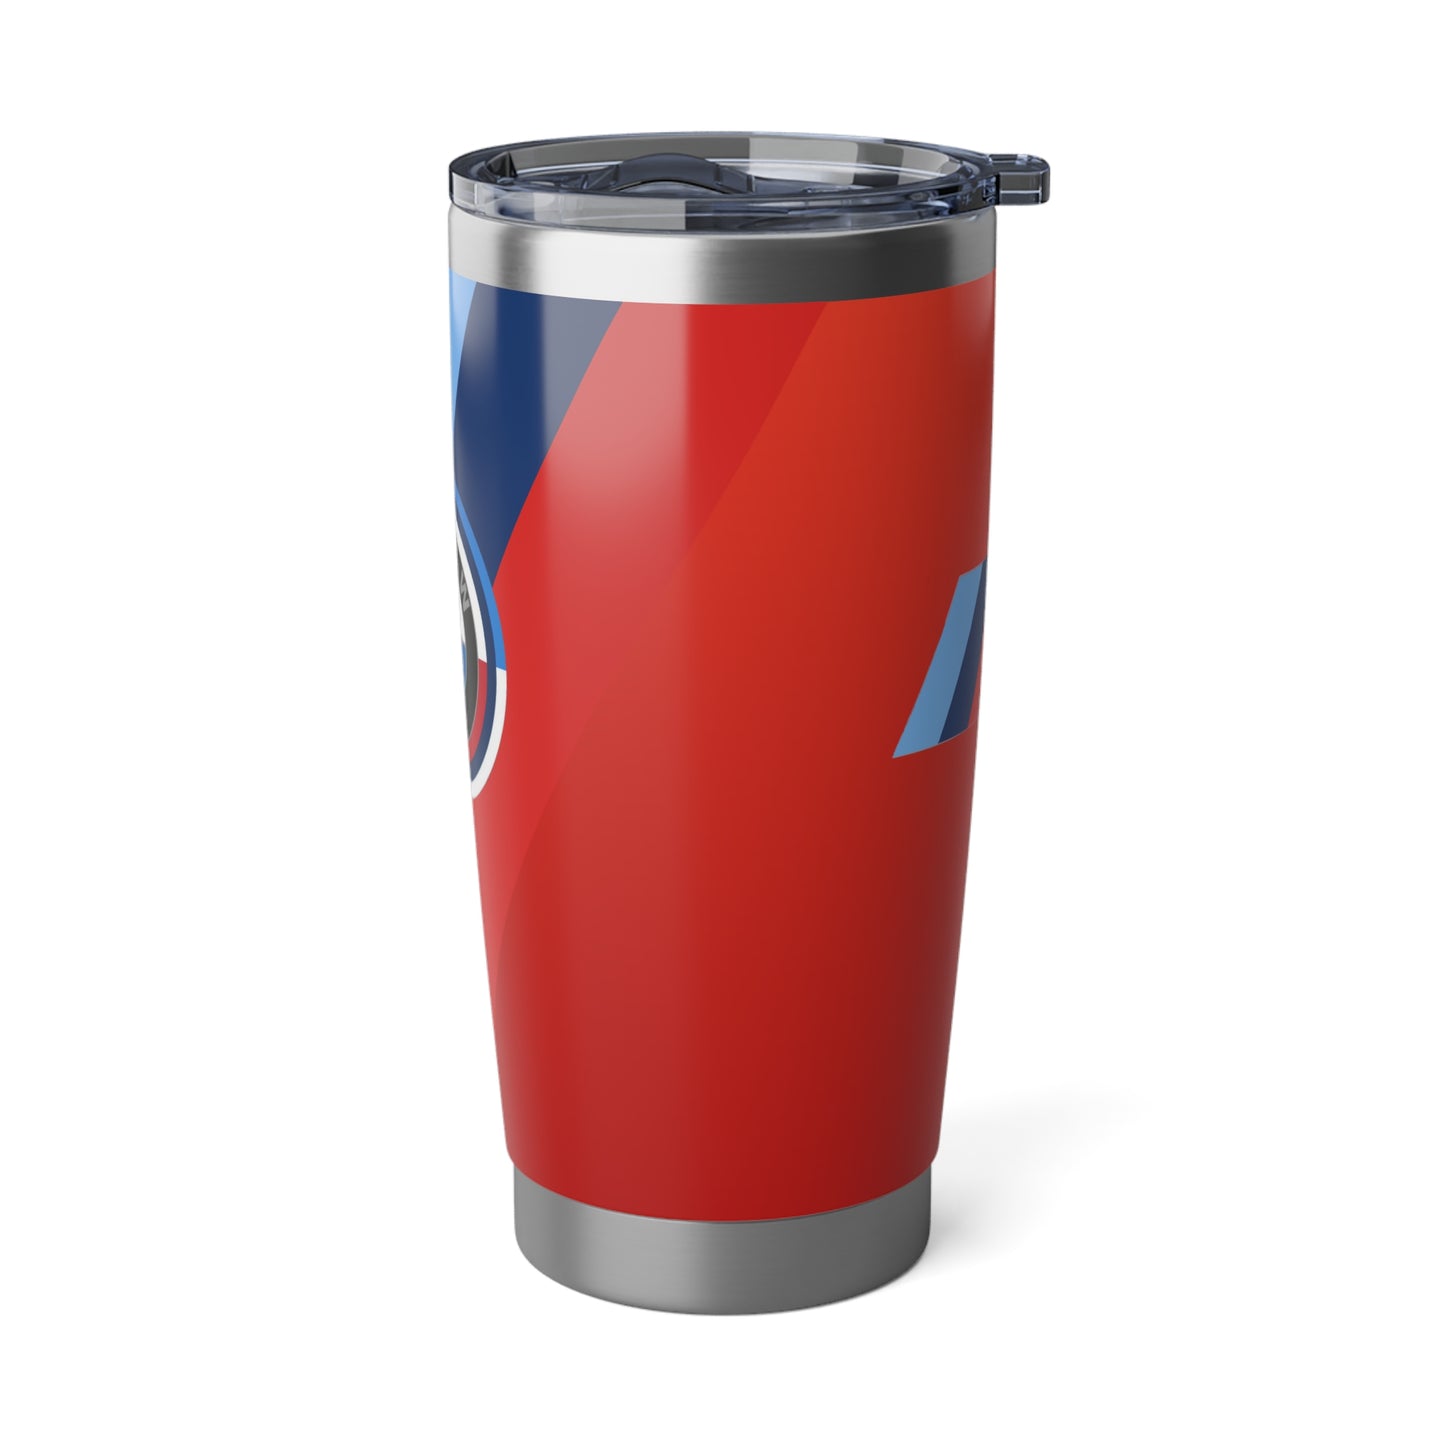 BMW 20oz Tumbler in Toronto Red - 50 Jahre - M Piping & Logo - Limited Edition - Stainless Steel - Car Enthusiast - G80 Fans